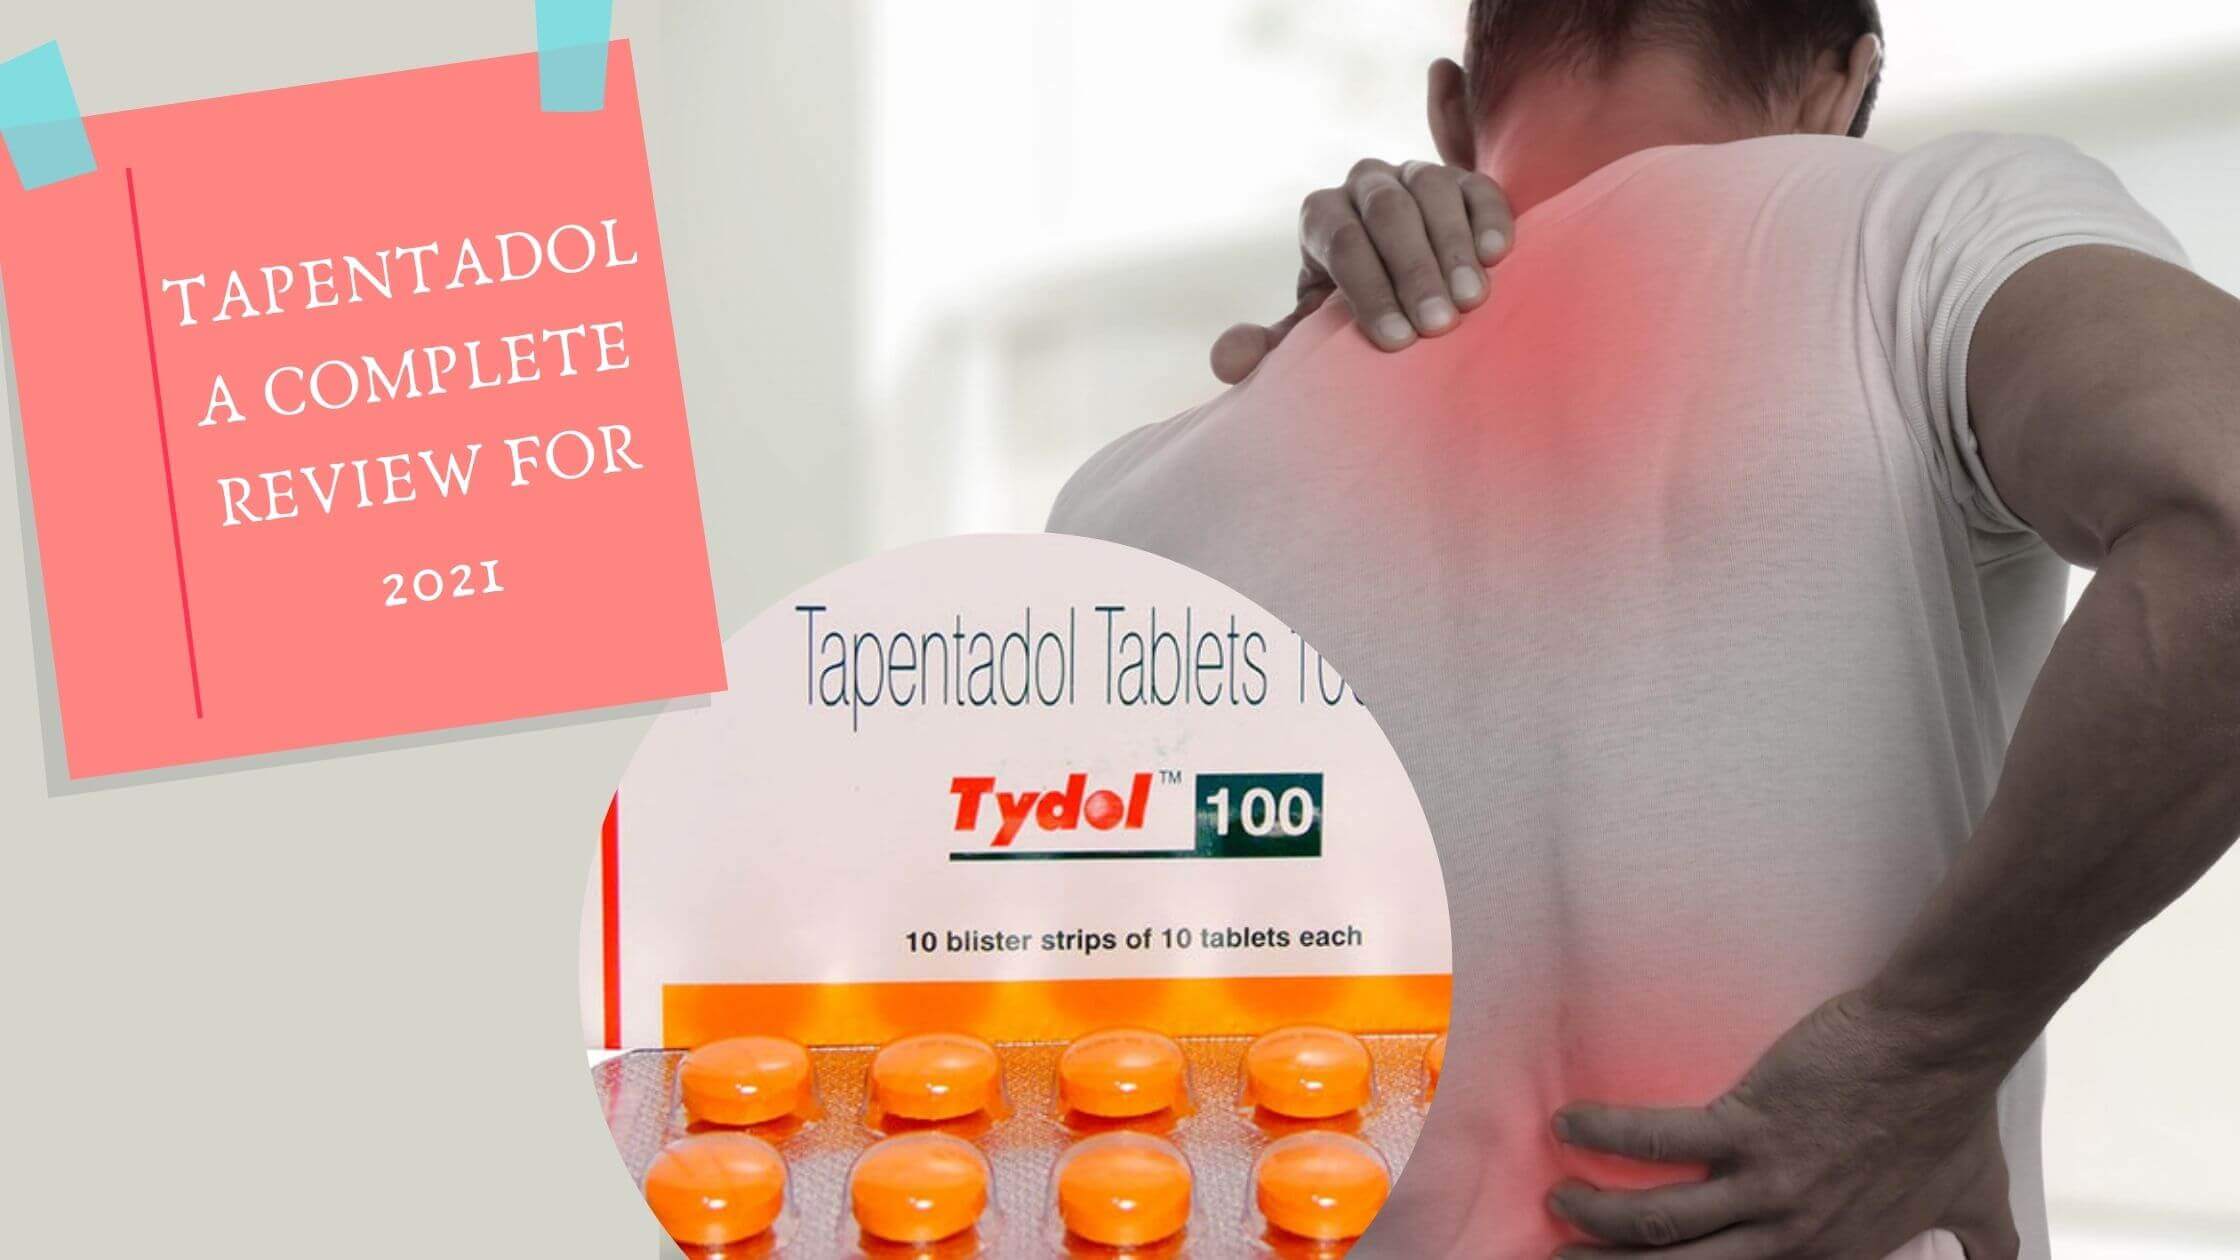 Tapentadol: A complete review for 2021